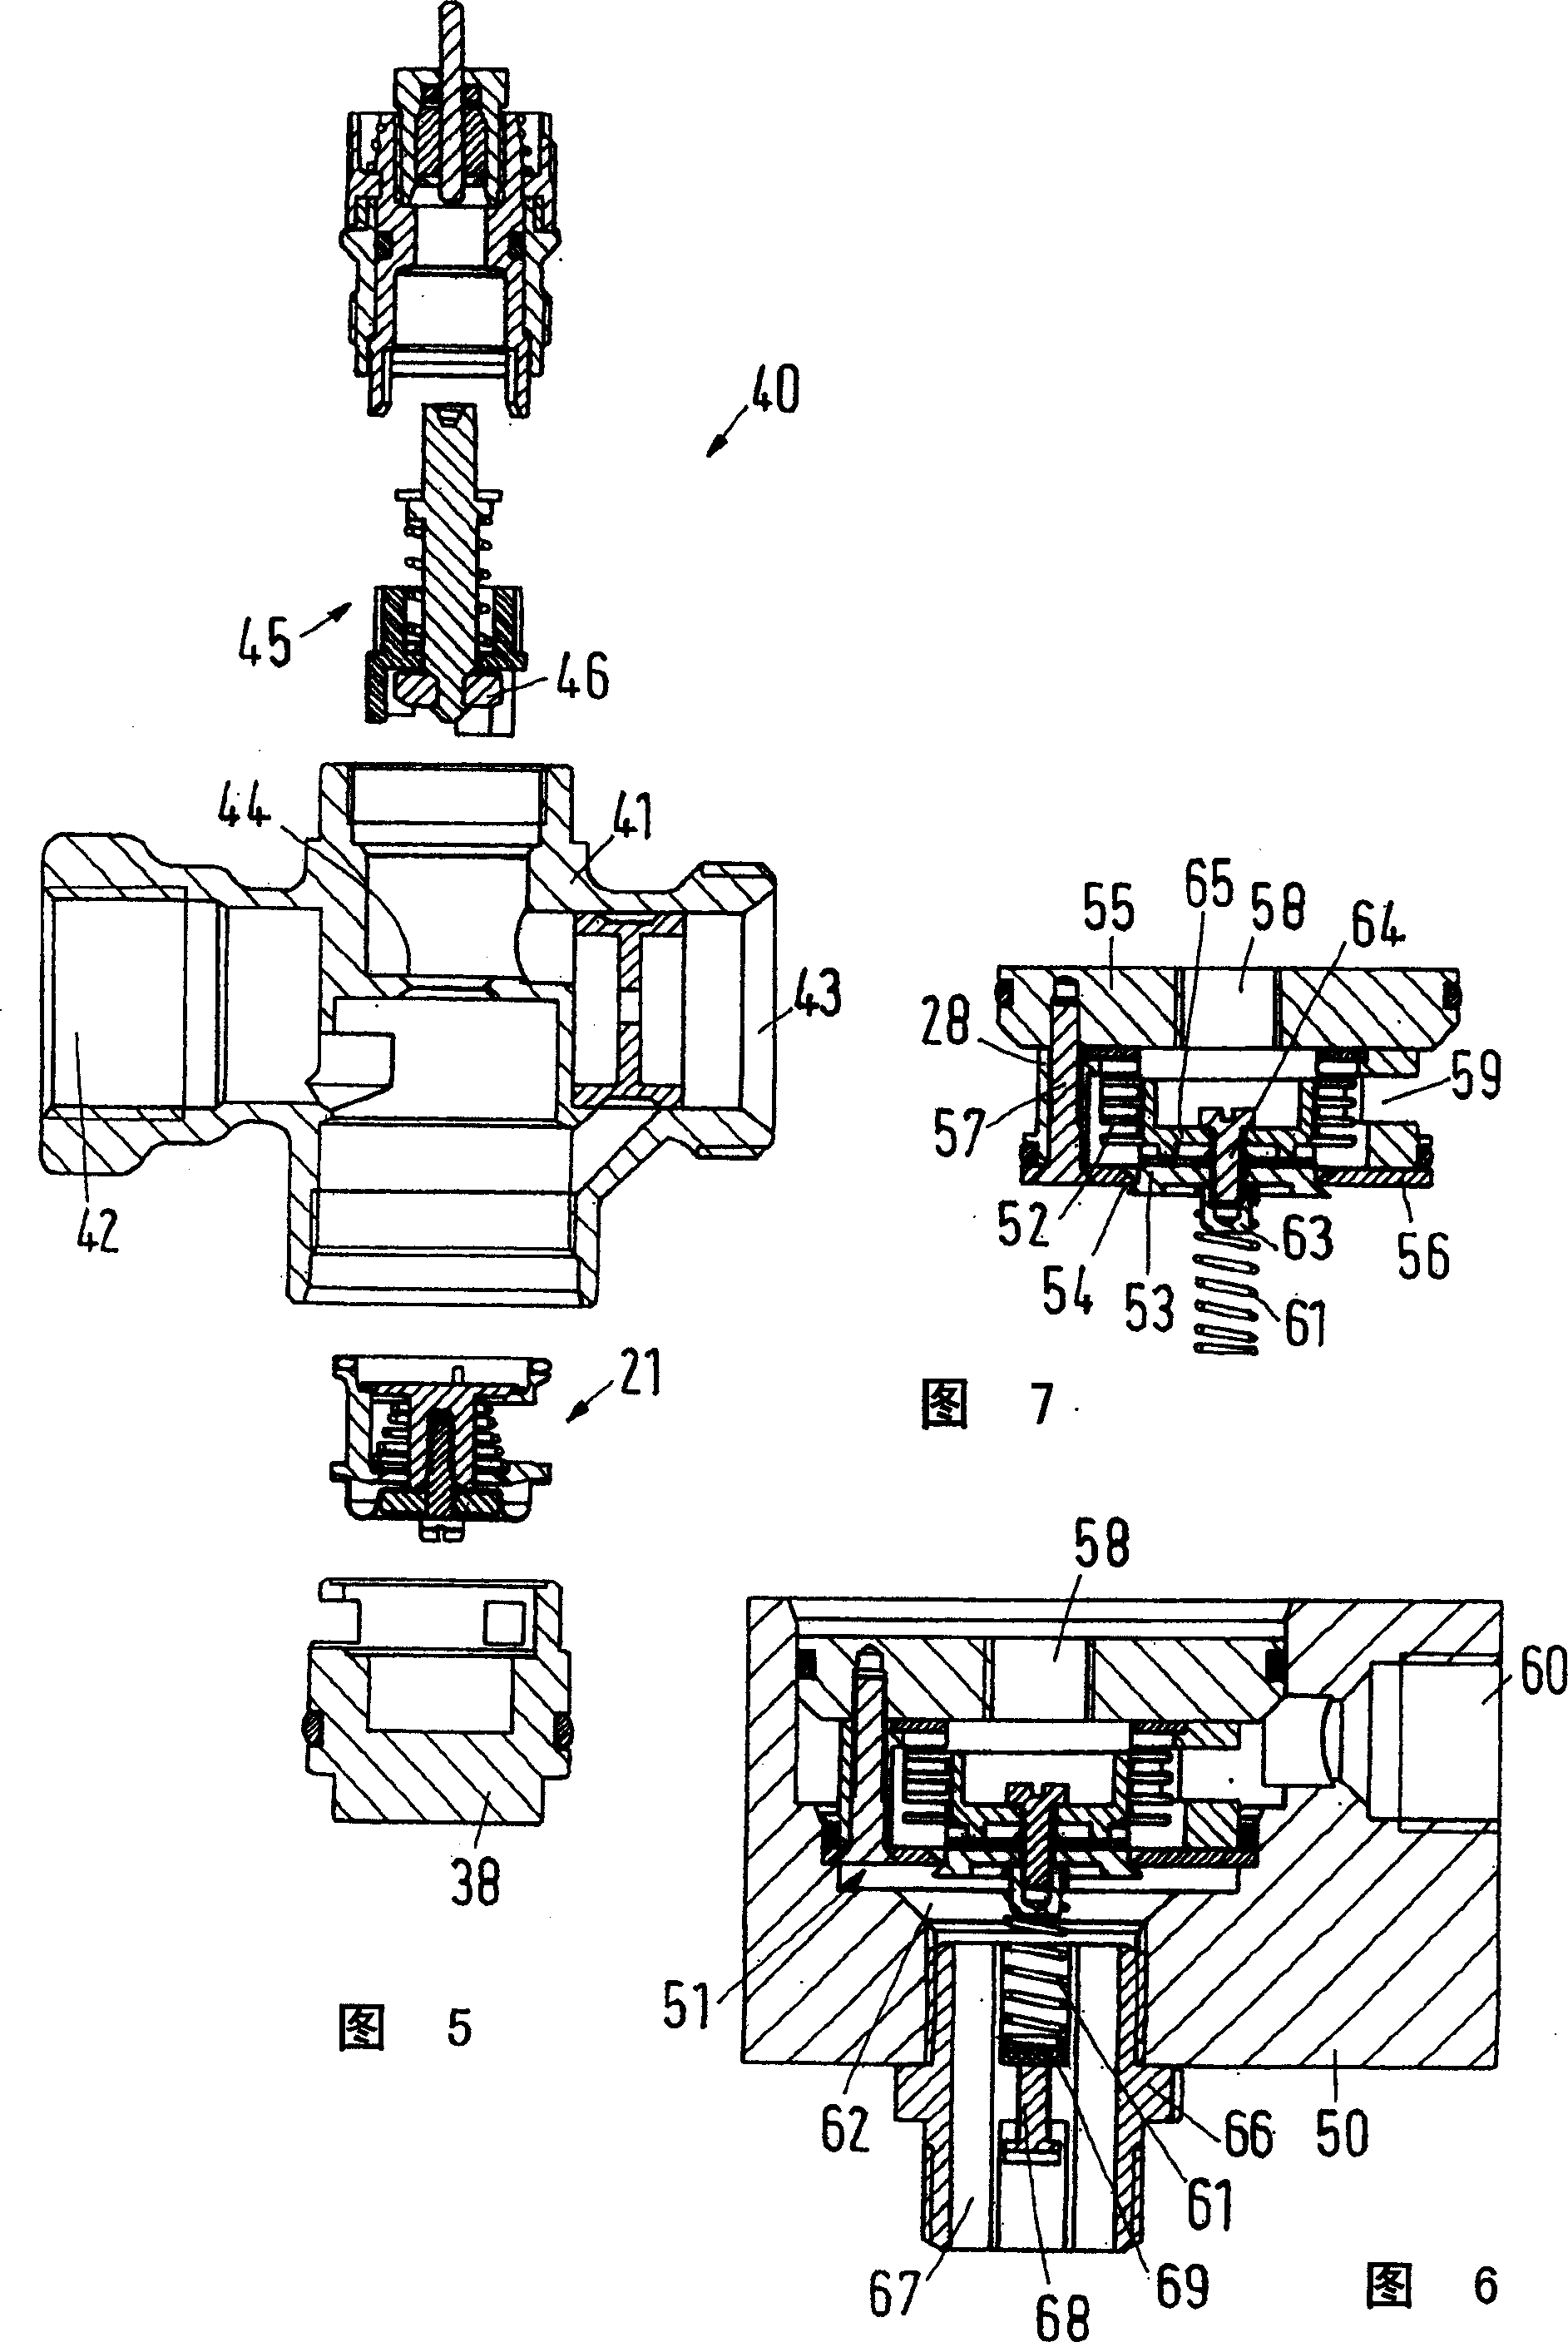 Valve apparatus for heat transfer, especially for heating element